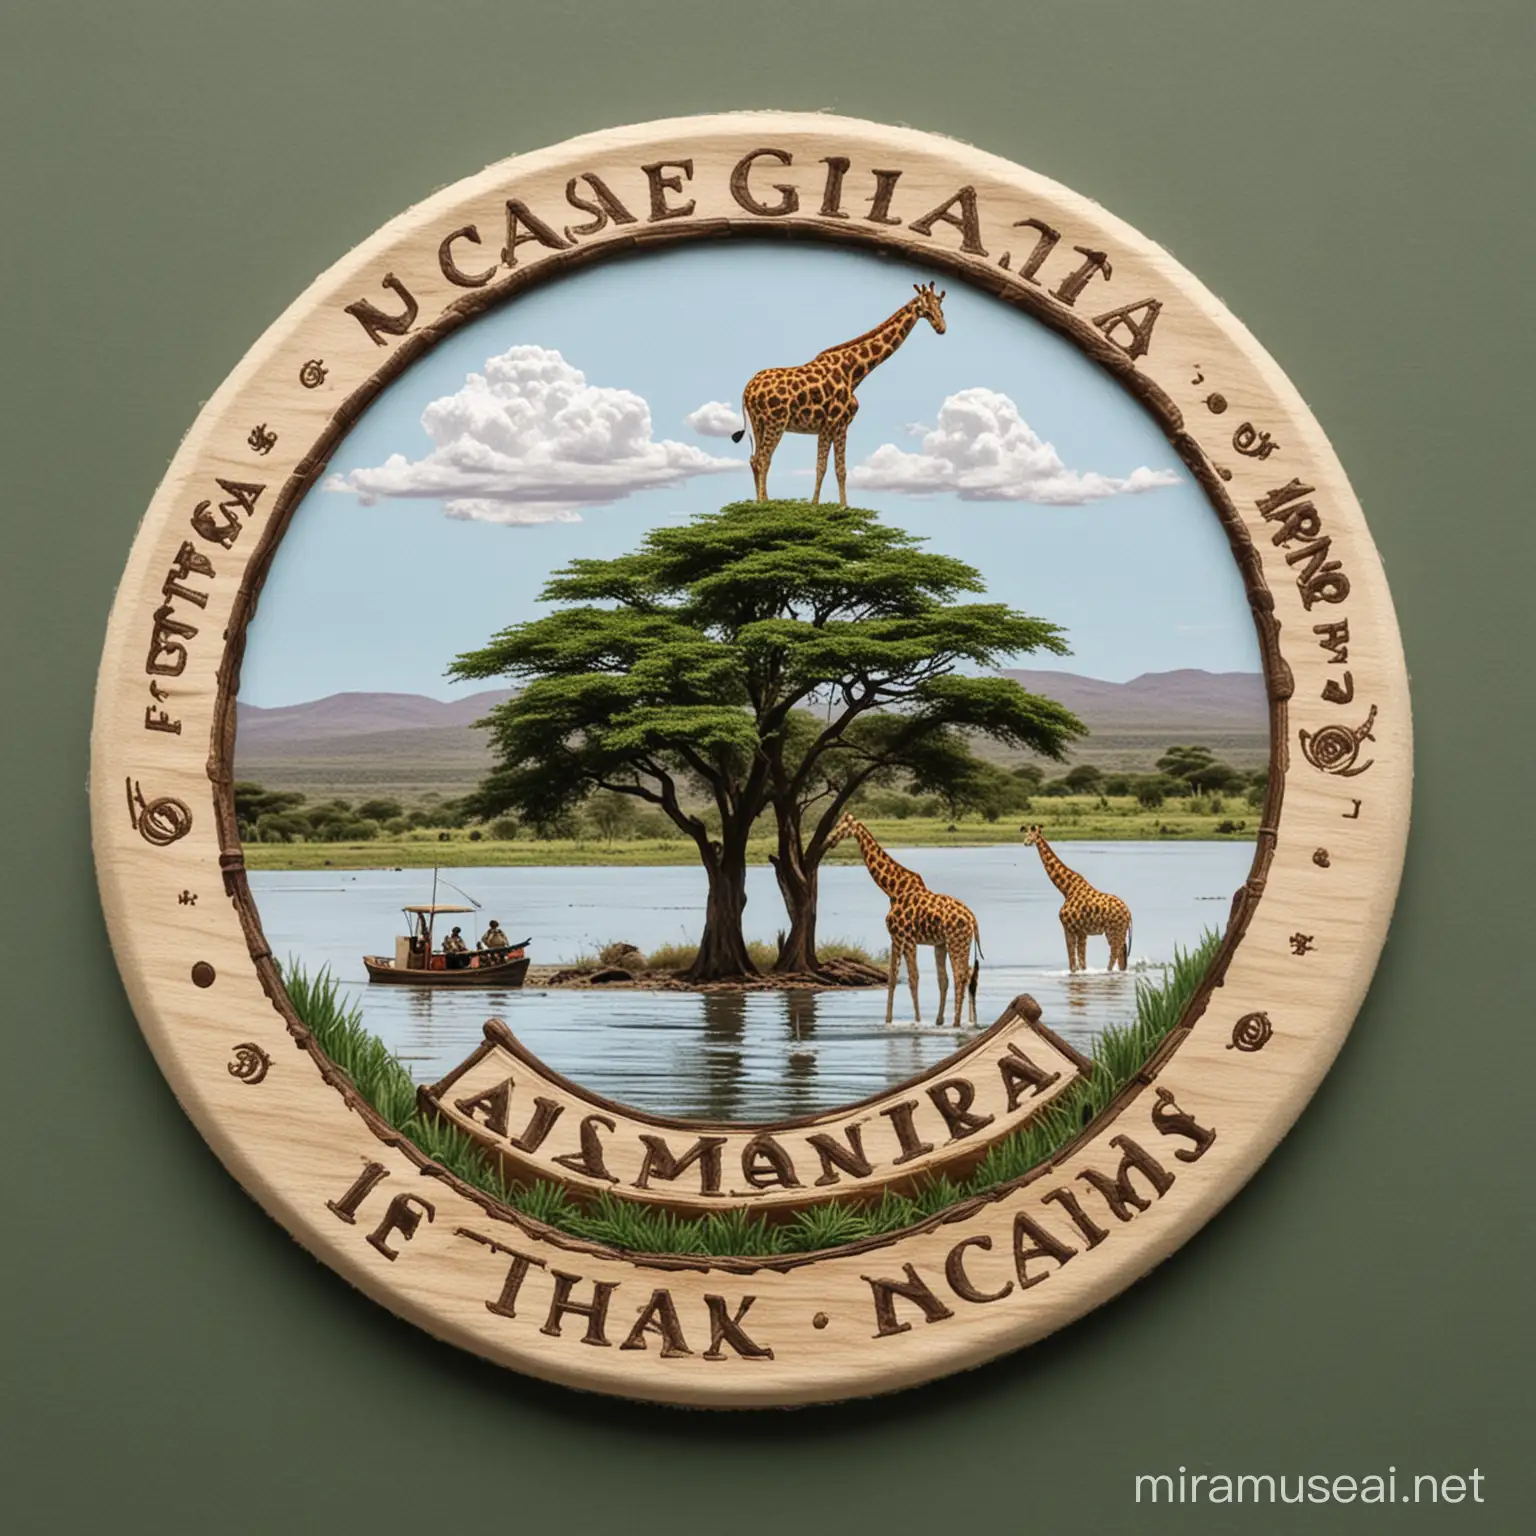 imagine/ a symbol a round logo of eco-safaris that will have an acacia tree a giraffe eating its leaves and it beside a lake hippopotamus  opening it mouse wide in kenyan setup name i s lake naivasha boat riders

